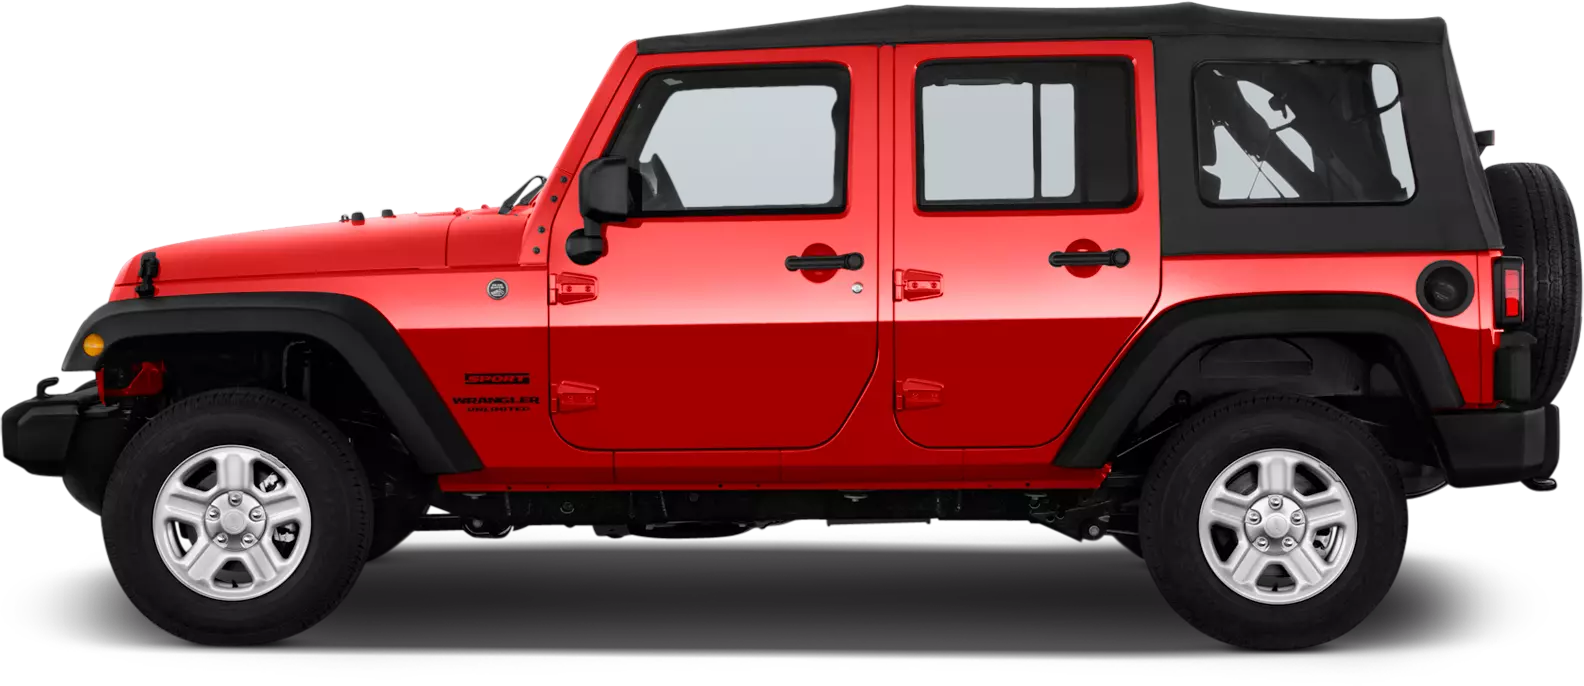 Illustration of a new red Jeep Grand Wrangler SUV.